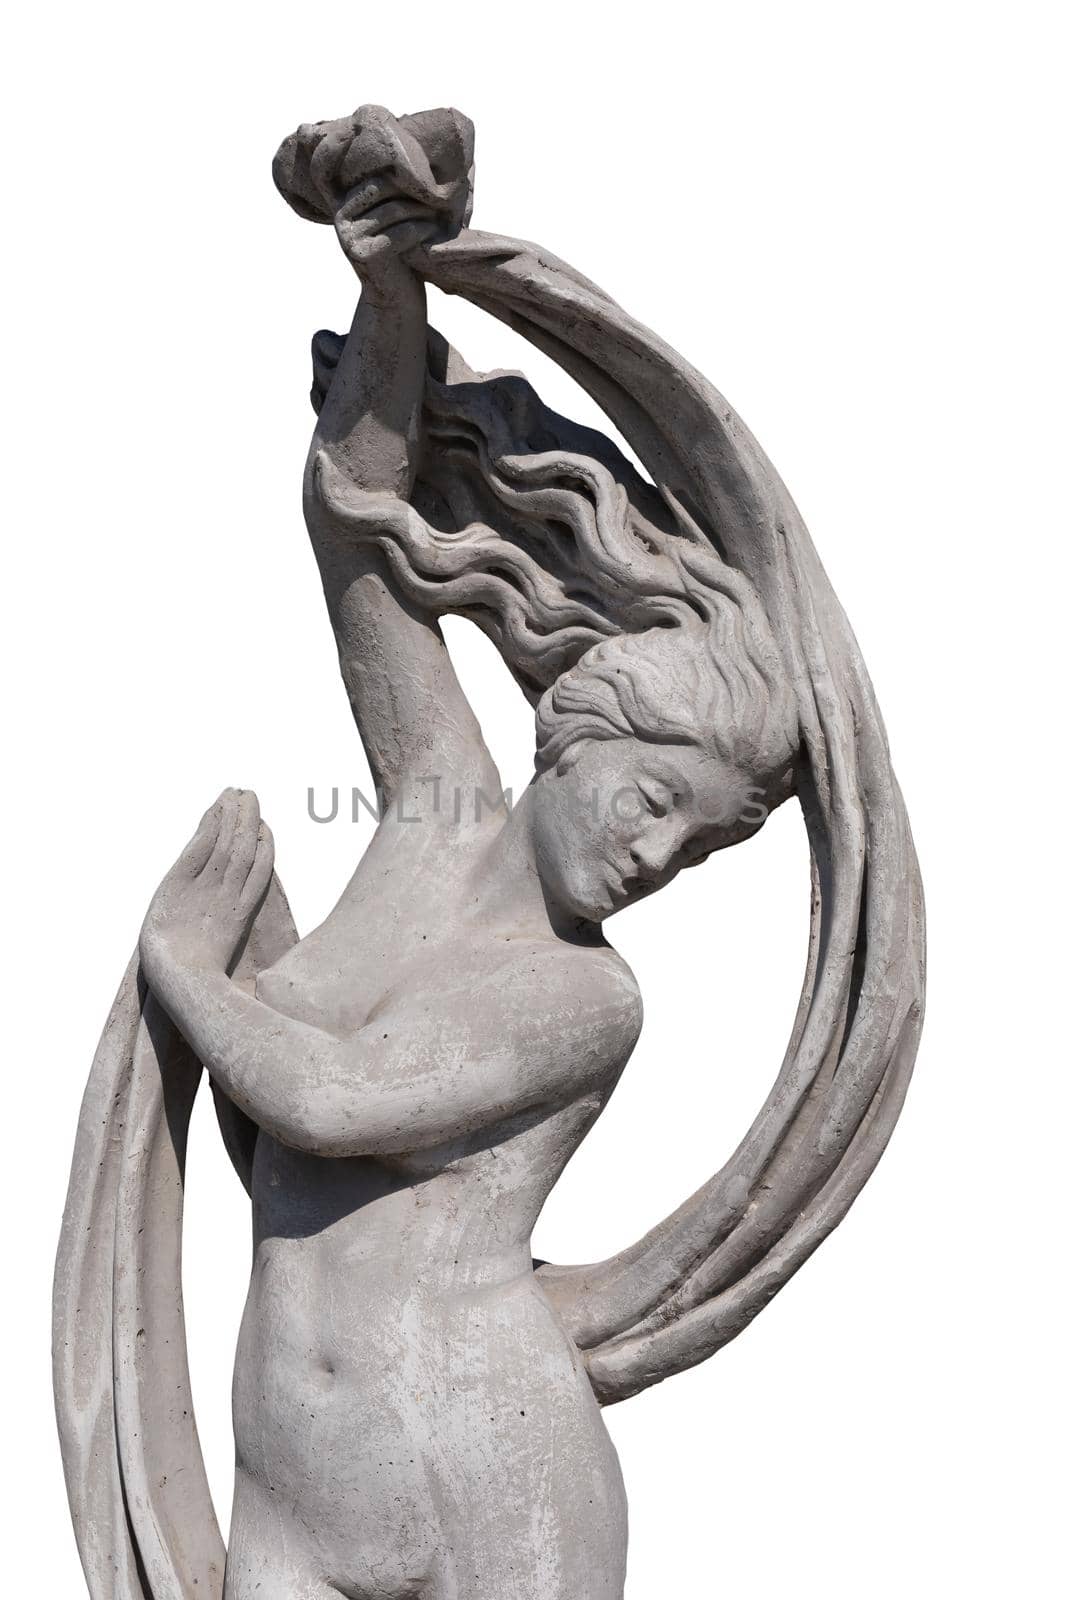 Stone sculpture of upper body of naked woman holding fabric on white background by Wavebreakmedia